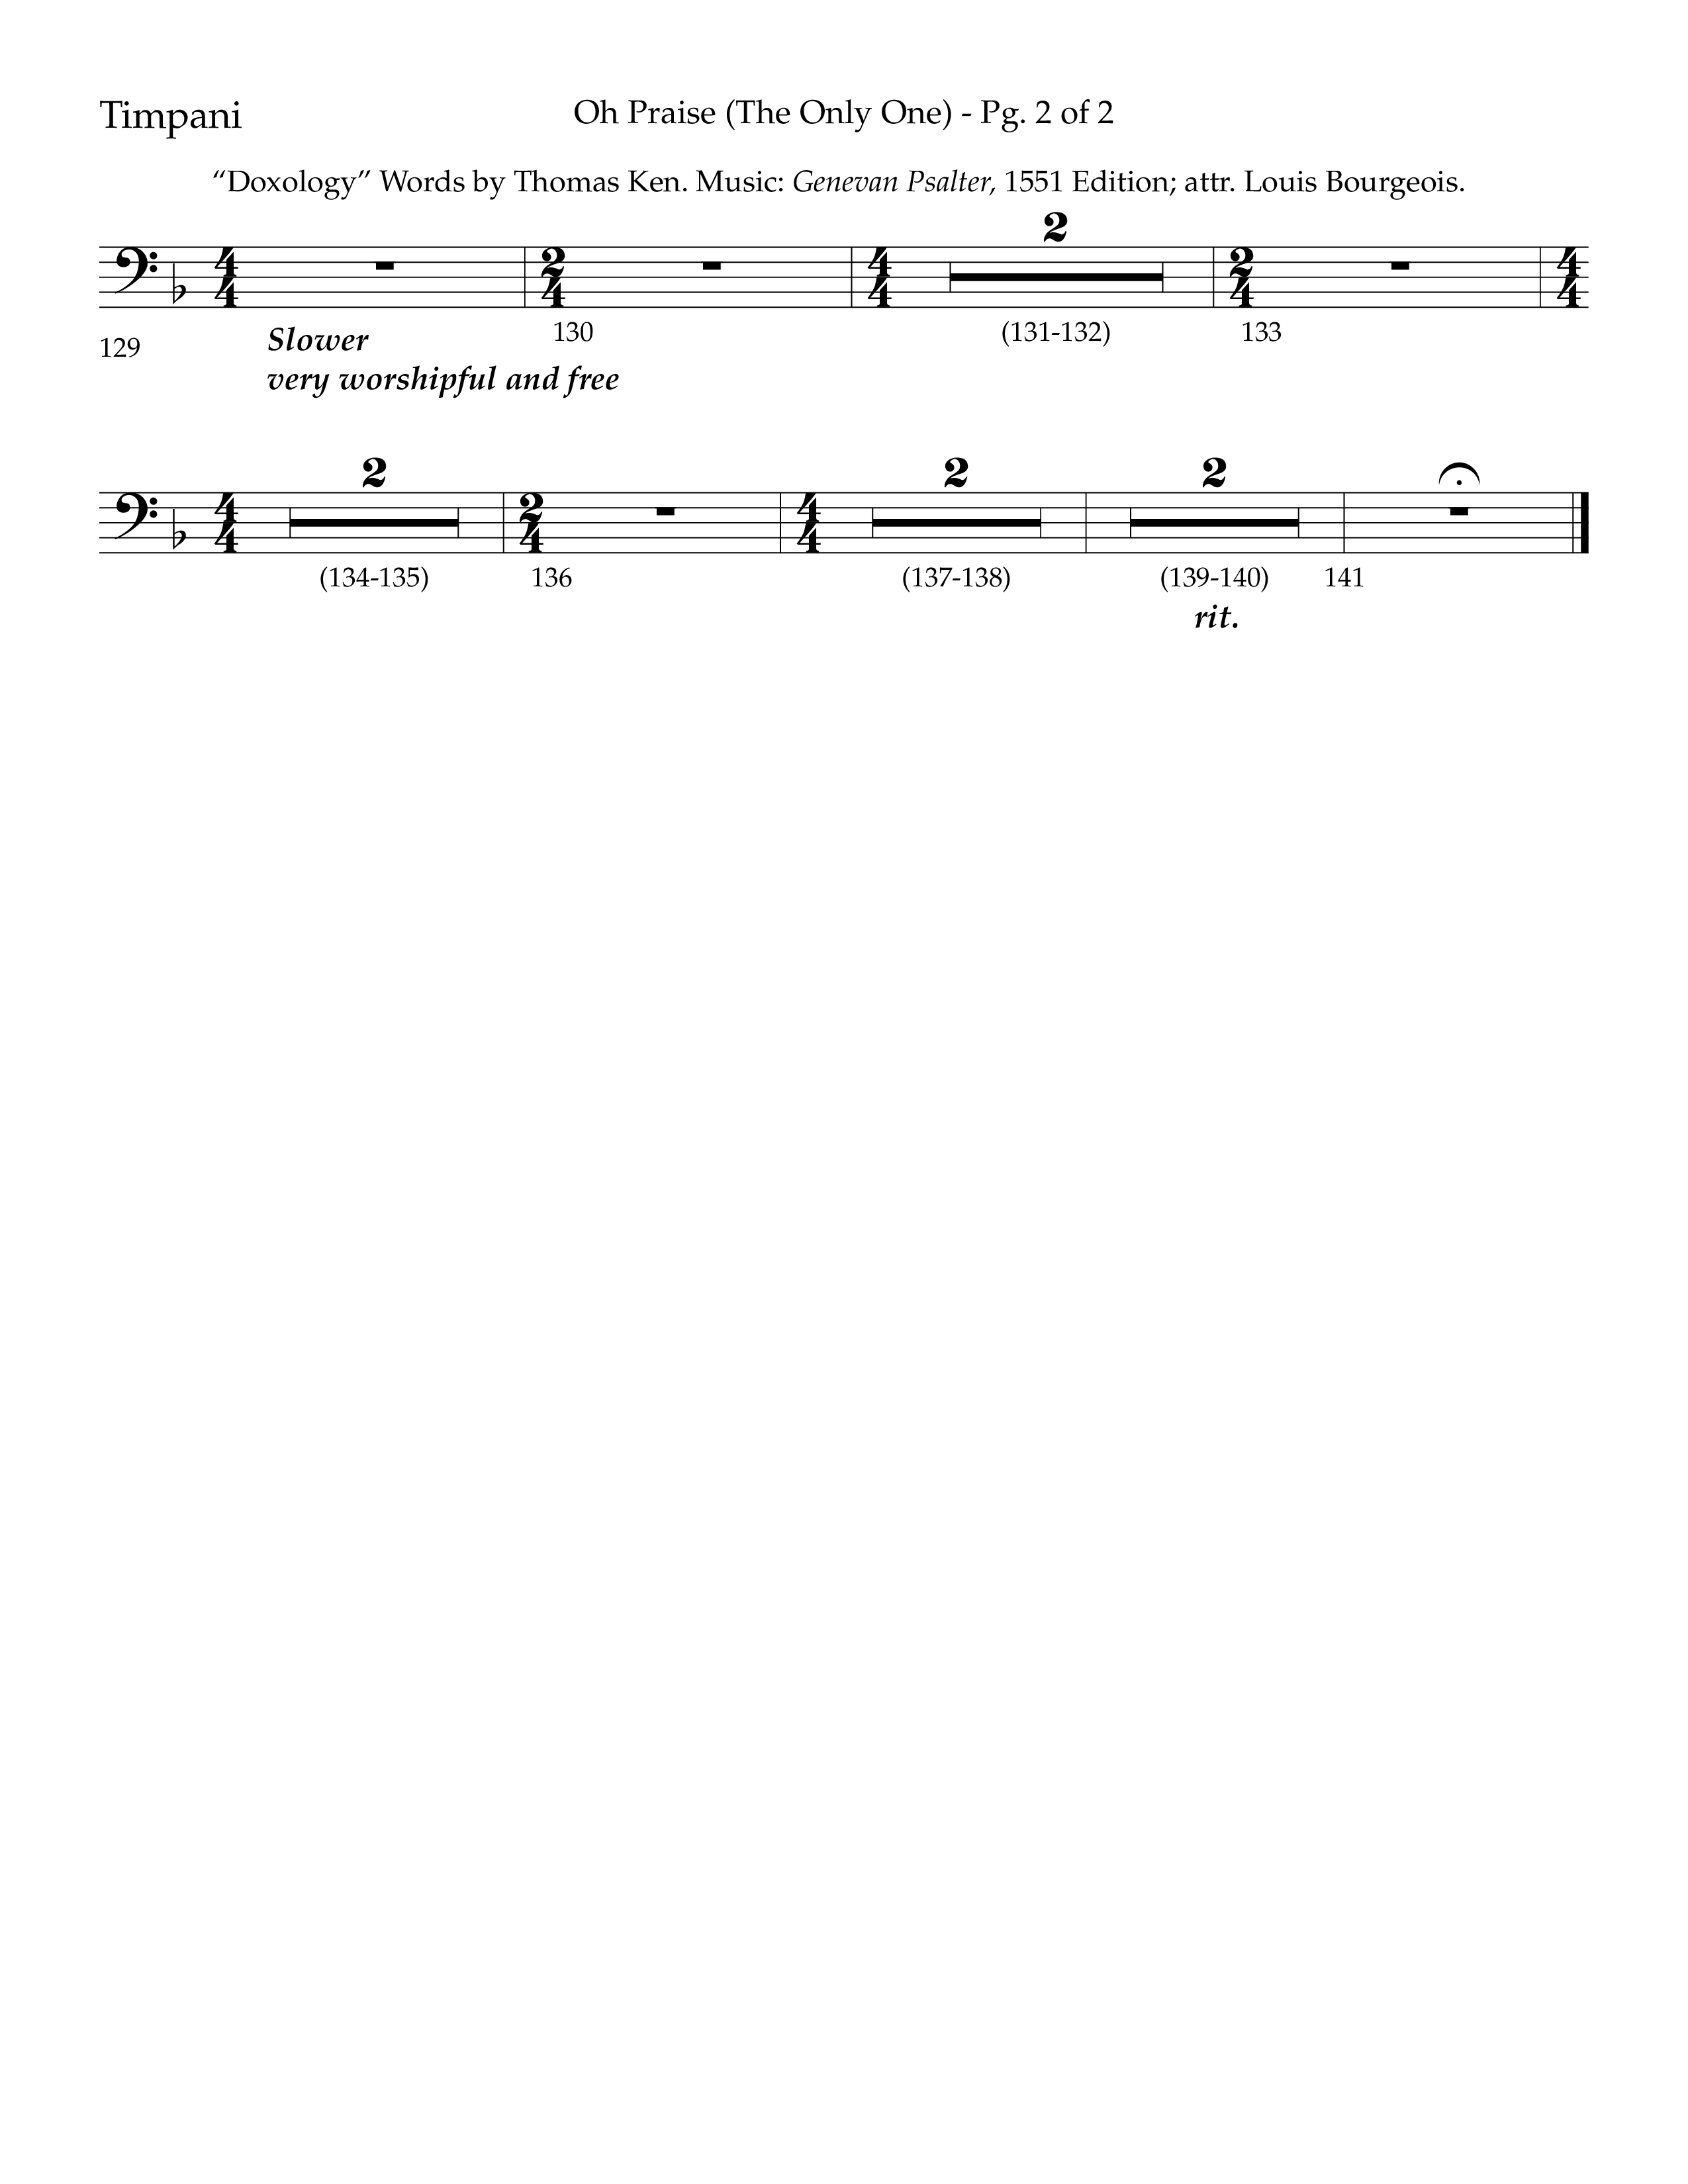 Oh Praise (The Only One) with Doxology (Choral Anthem SATB) Timpani (Lifeway Choral / Arr. John Bolin / Orch. Cliff Duren)